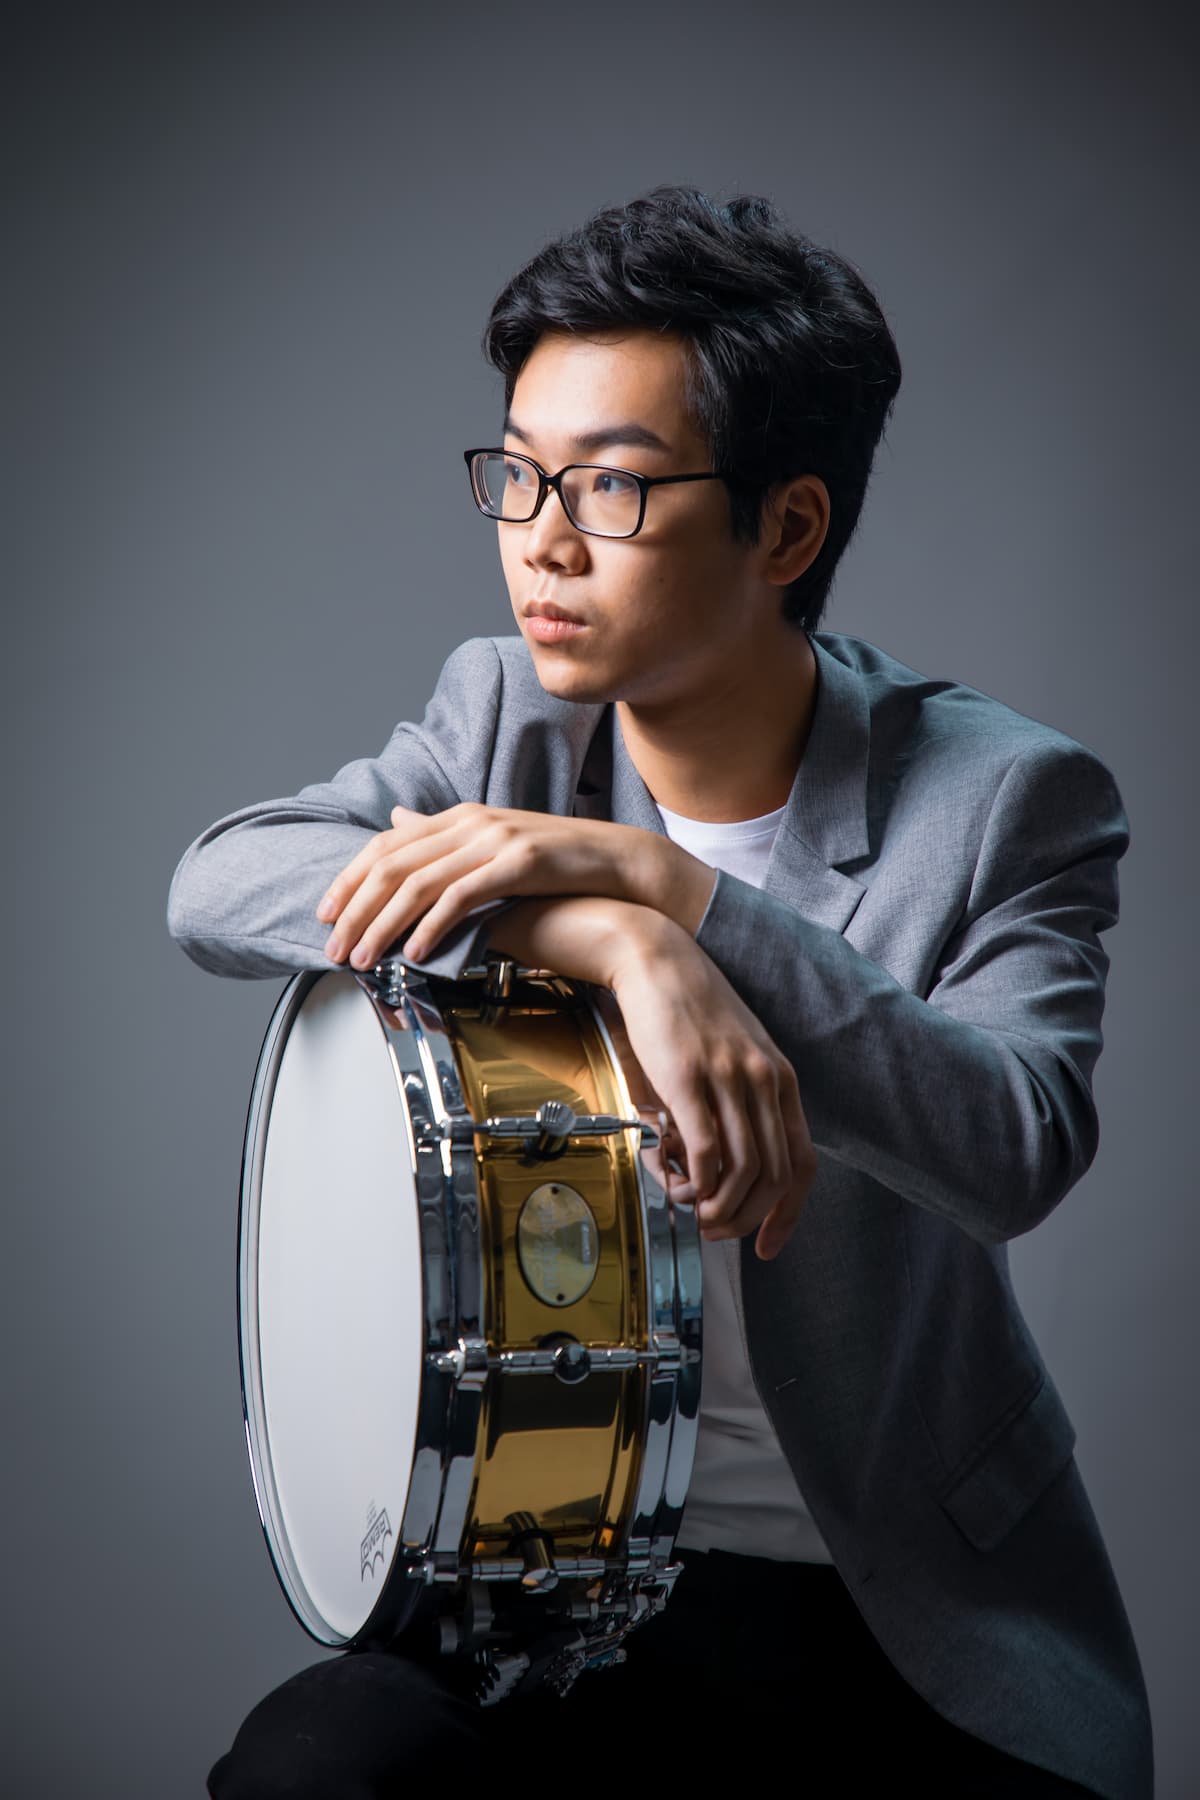 Percussionist Michael Yeung